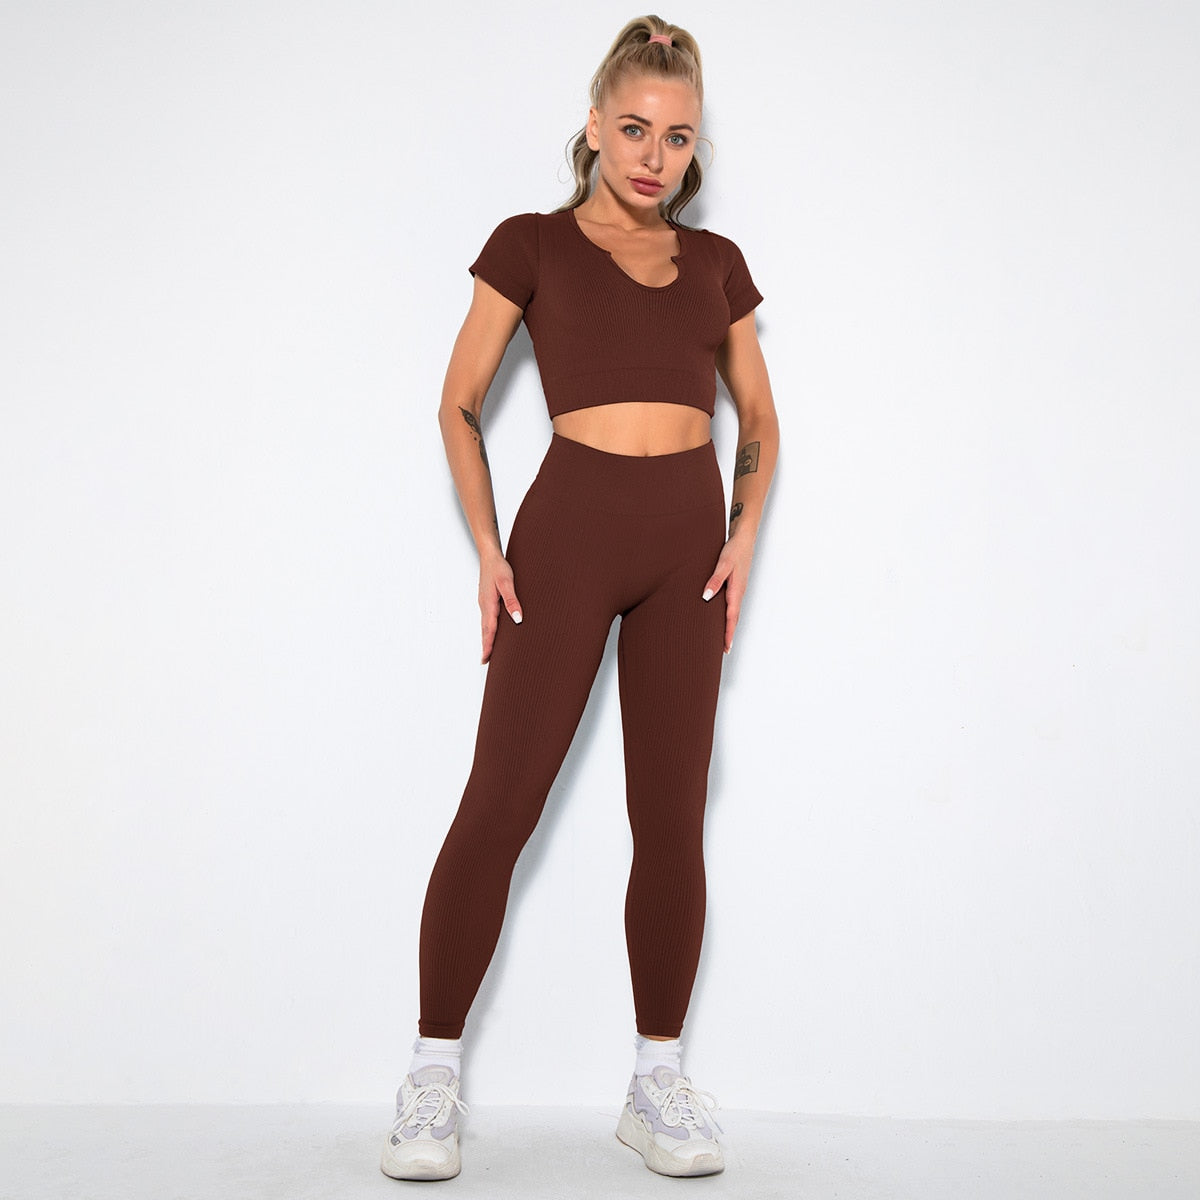 Gym Set Summer 2 Piece Outfit Ribbed Sport Bra Leggings Seamless Workout Set Fitness Active Wear Tracksuit Women Yoga Clothing